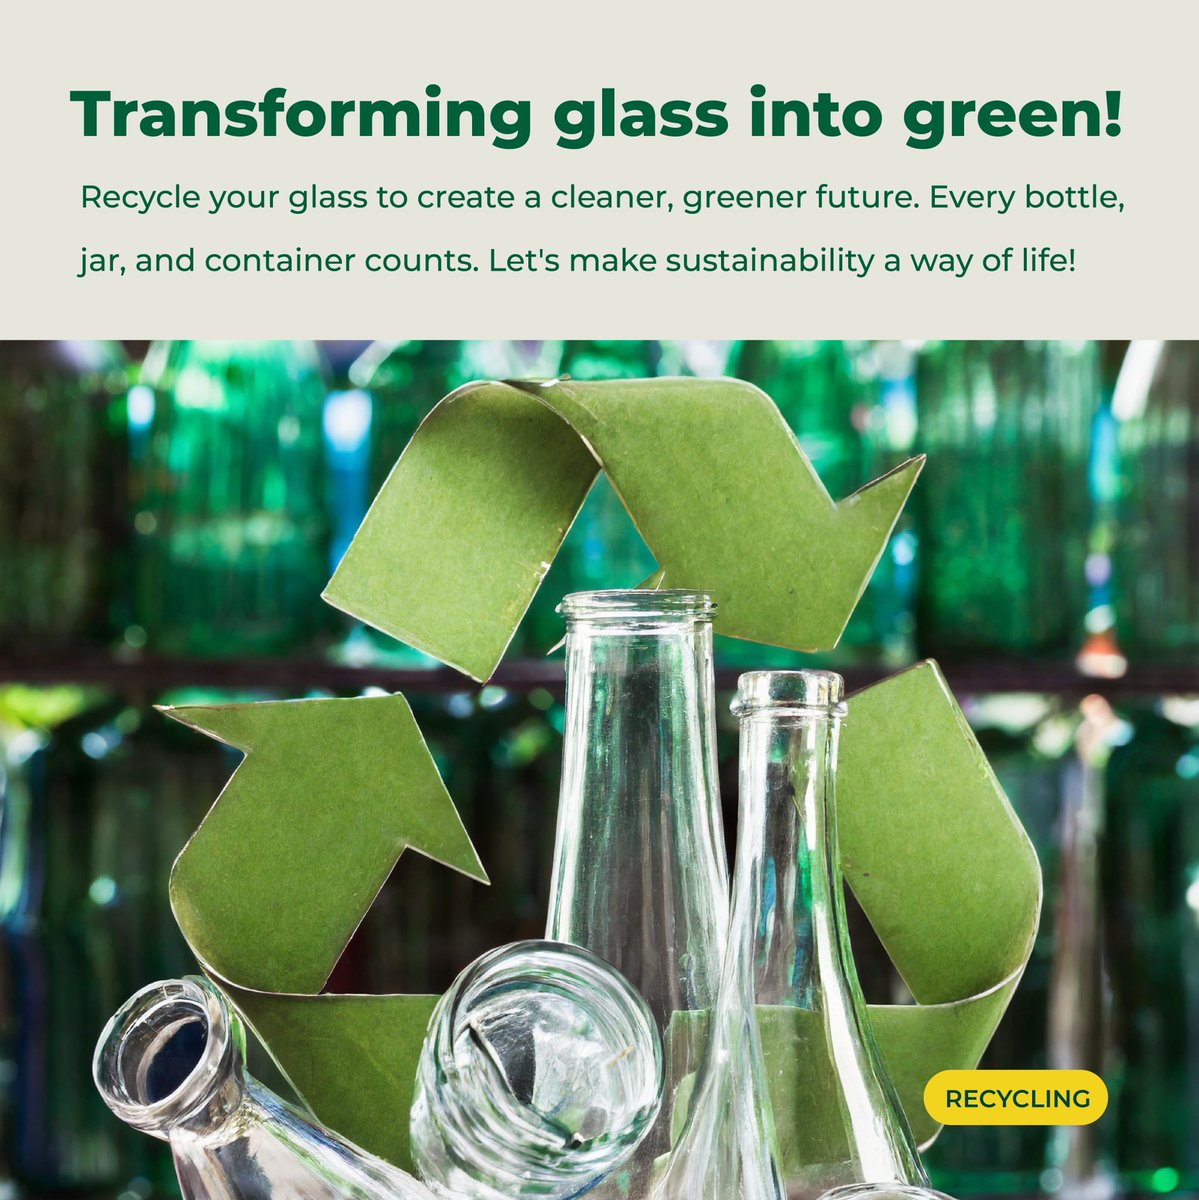 Small actions, like recycling a bottle, add up to make a big impact on our environment. Let’s work together for a cleaner, brighter future! 💚✨ #GlassRecycling #SustainableLiving #GreenChoices